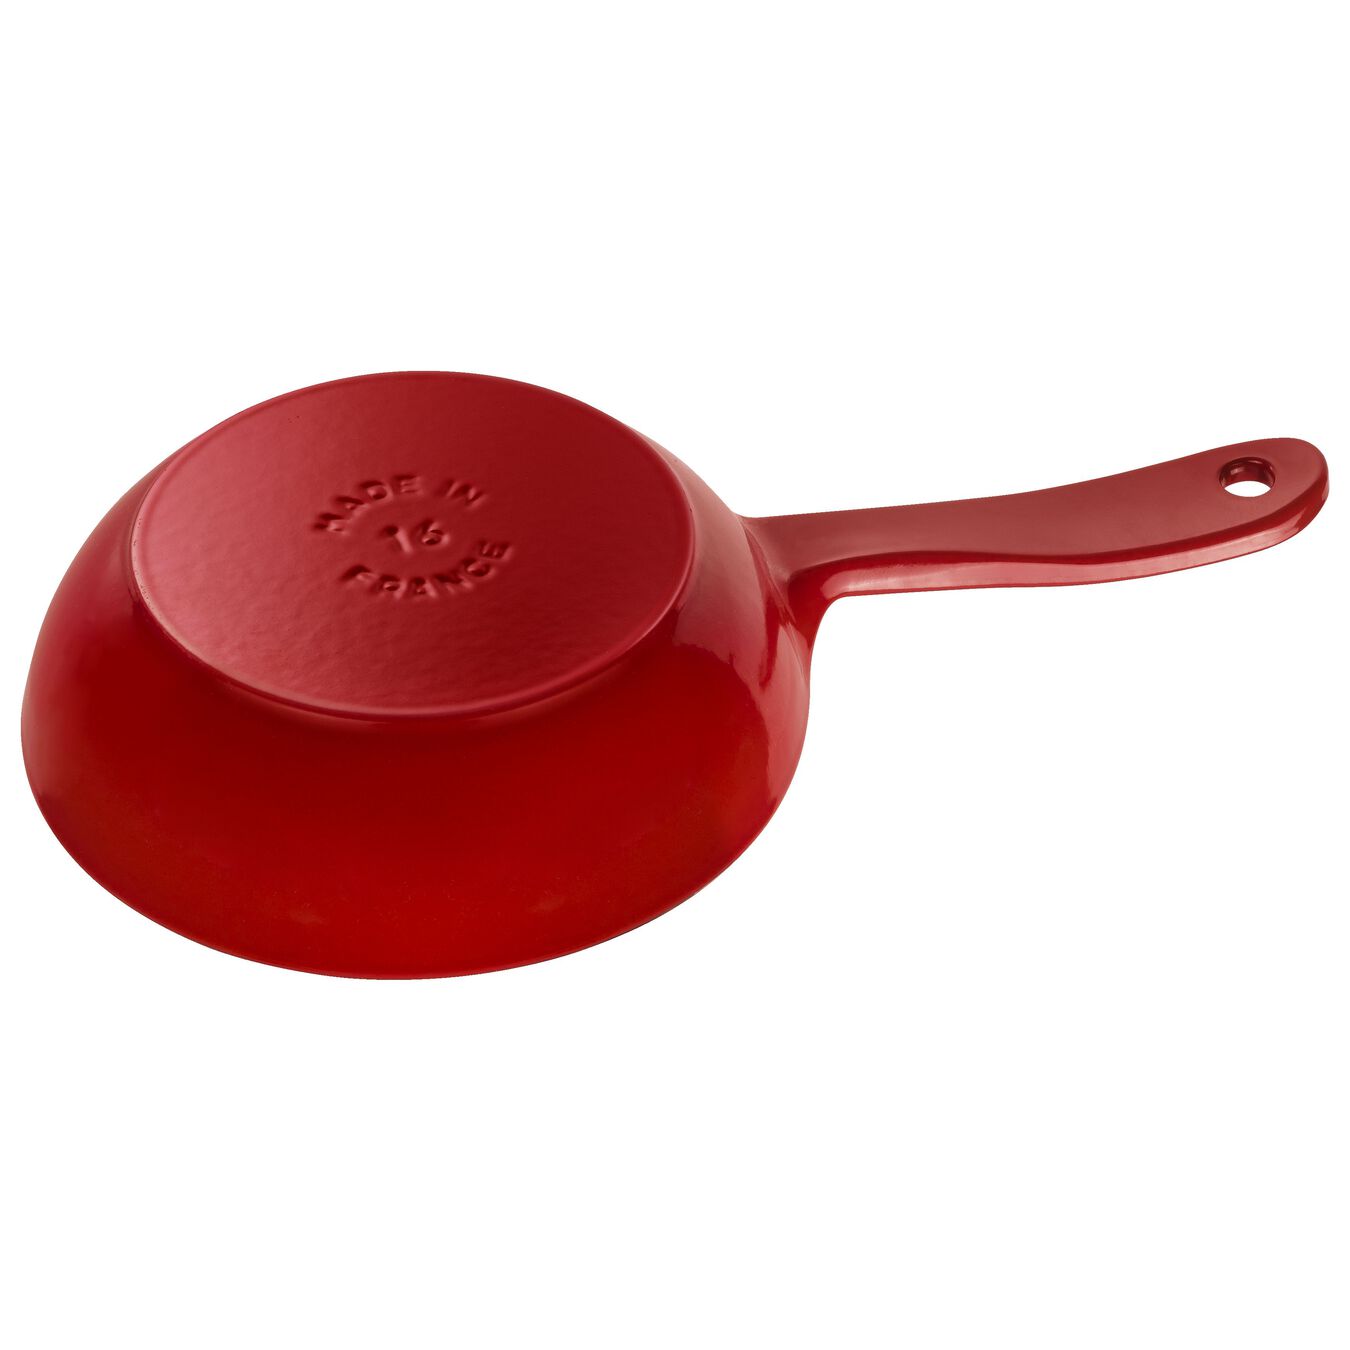 6.5-inch, Frying pan, cherry - Visual Imperfections,,large 2